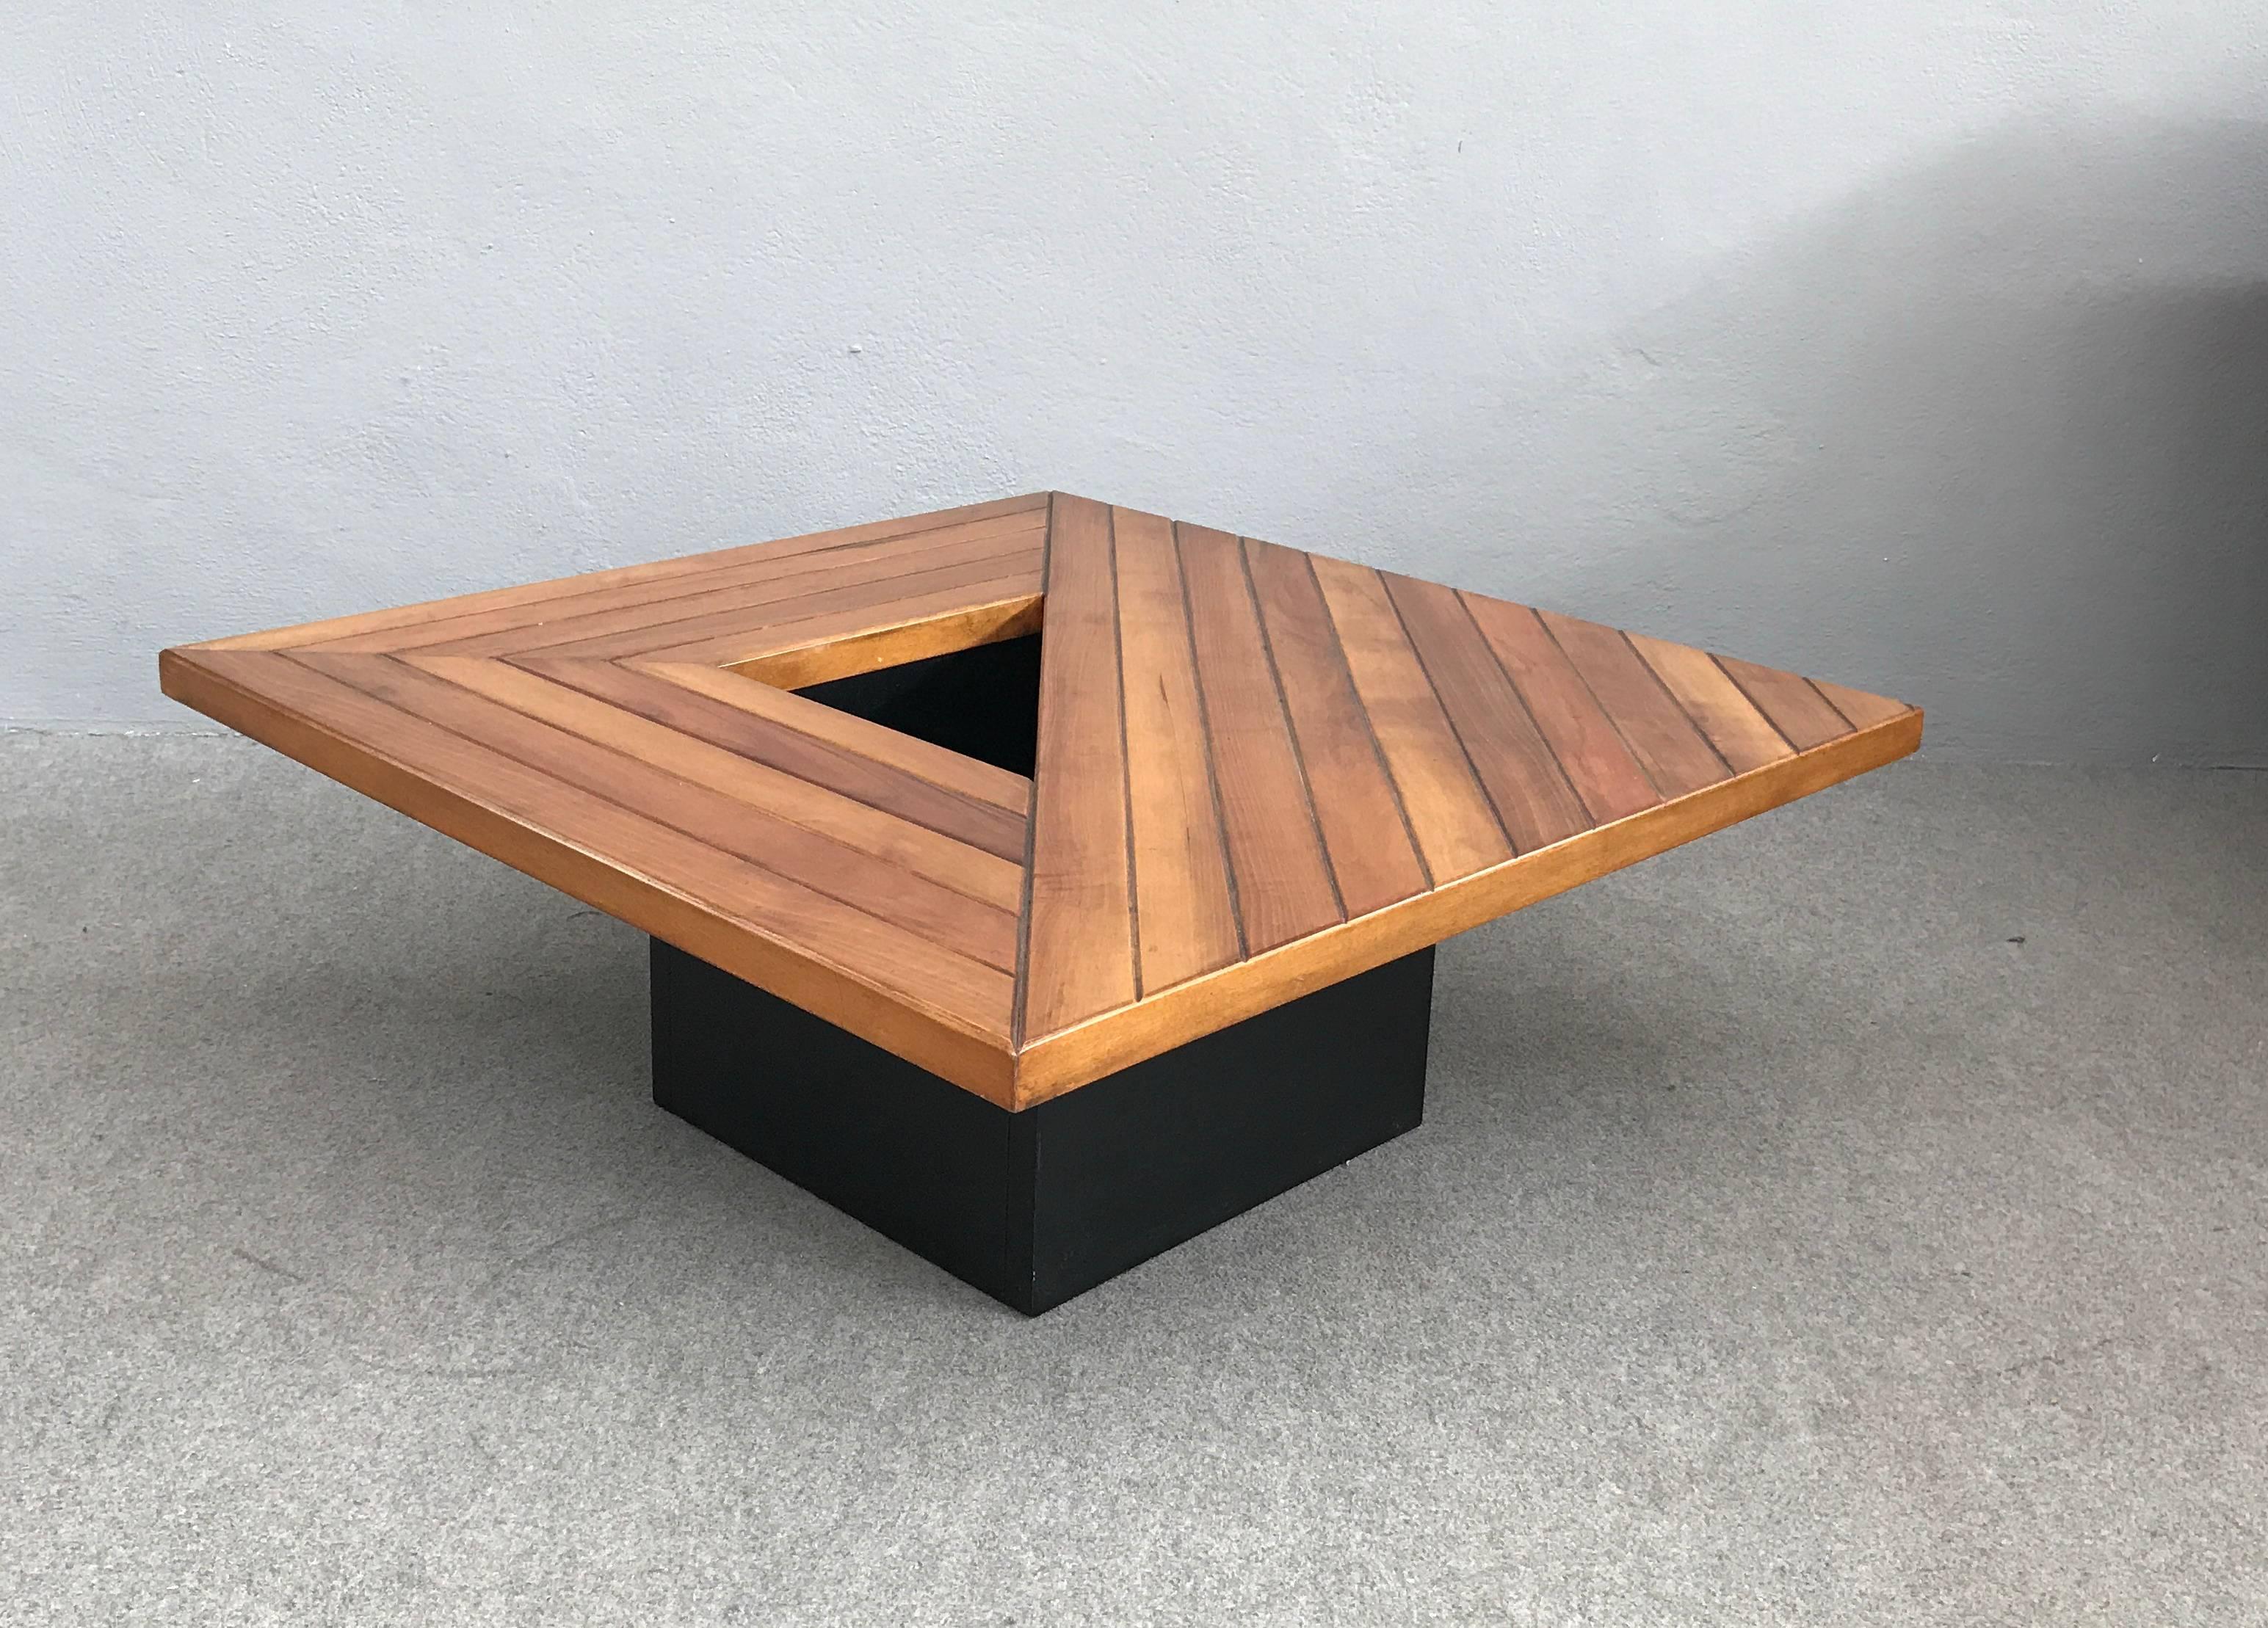 Late 20th Century Amazing Wood Coffee Table Attributed to Cassina